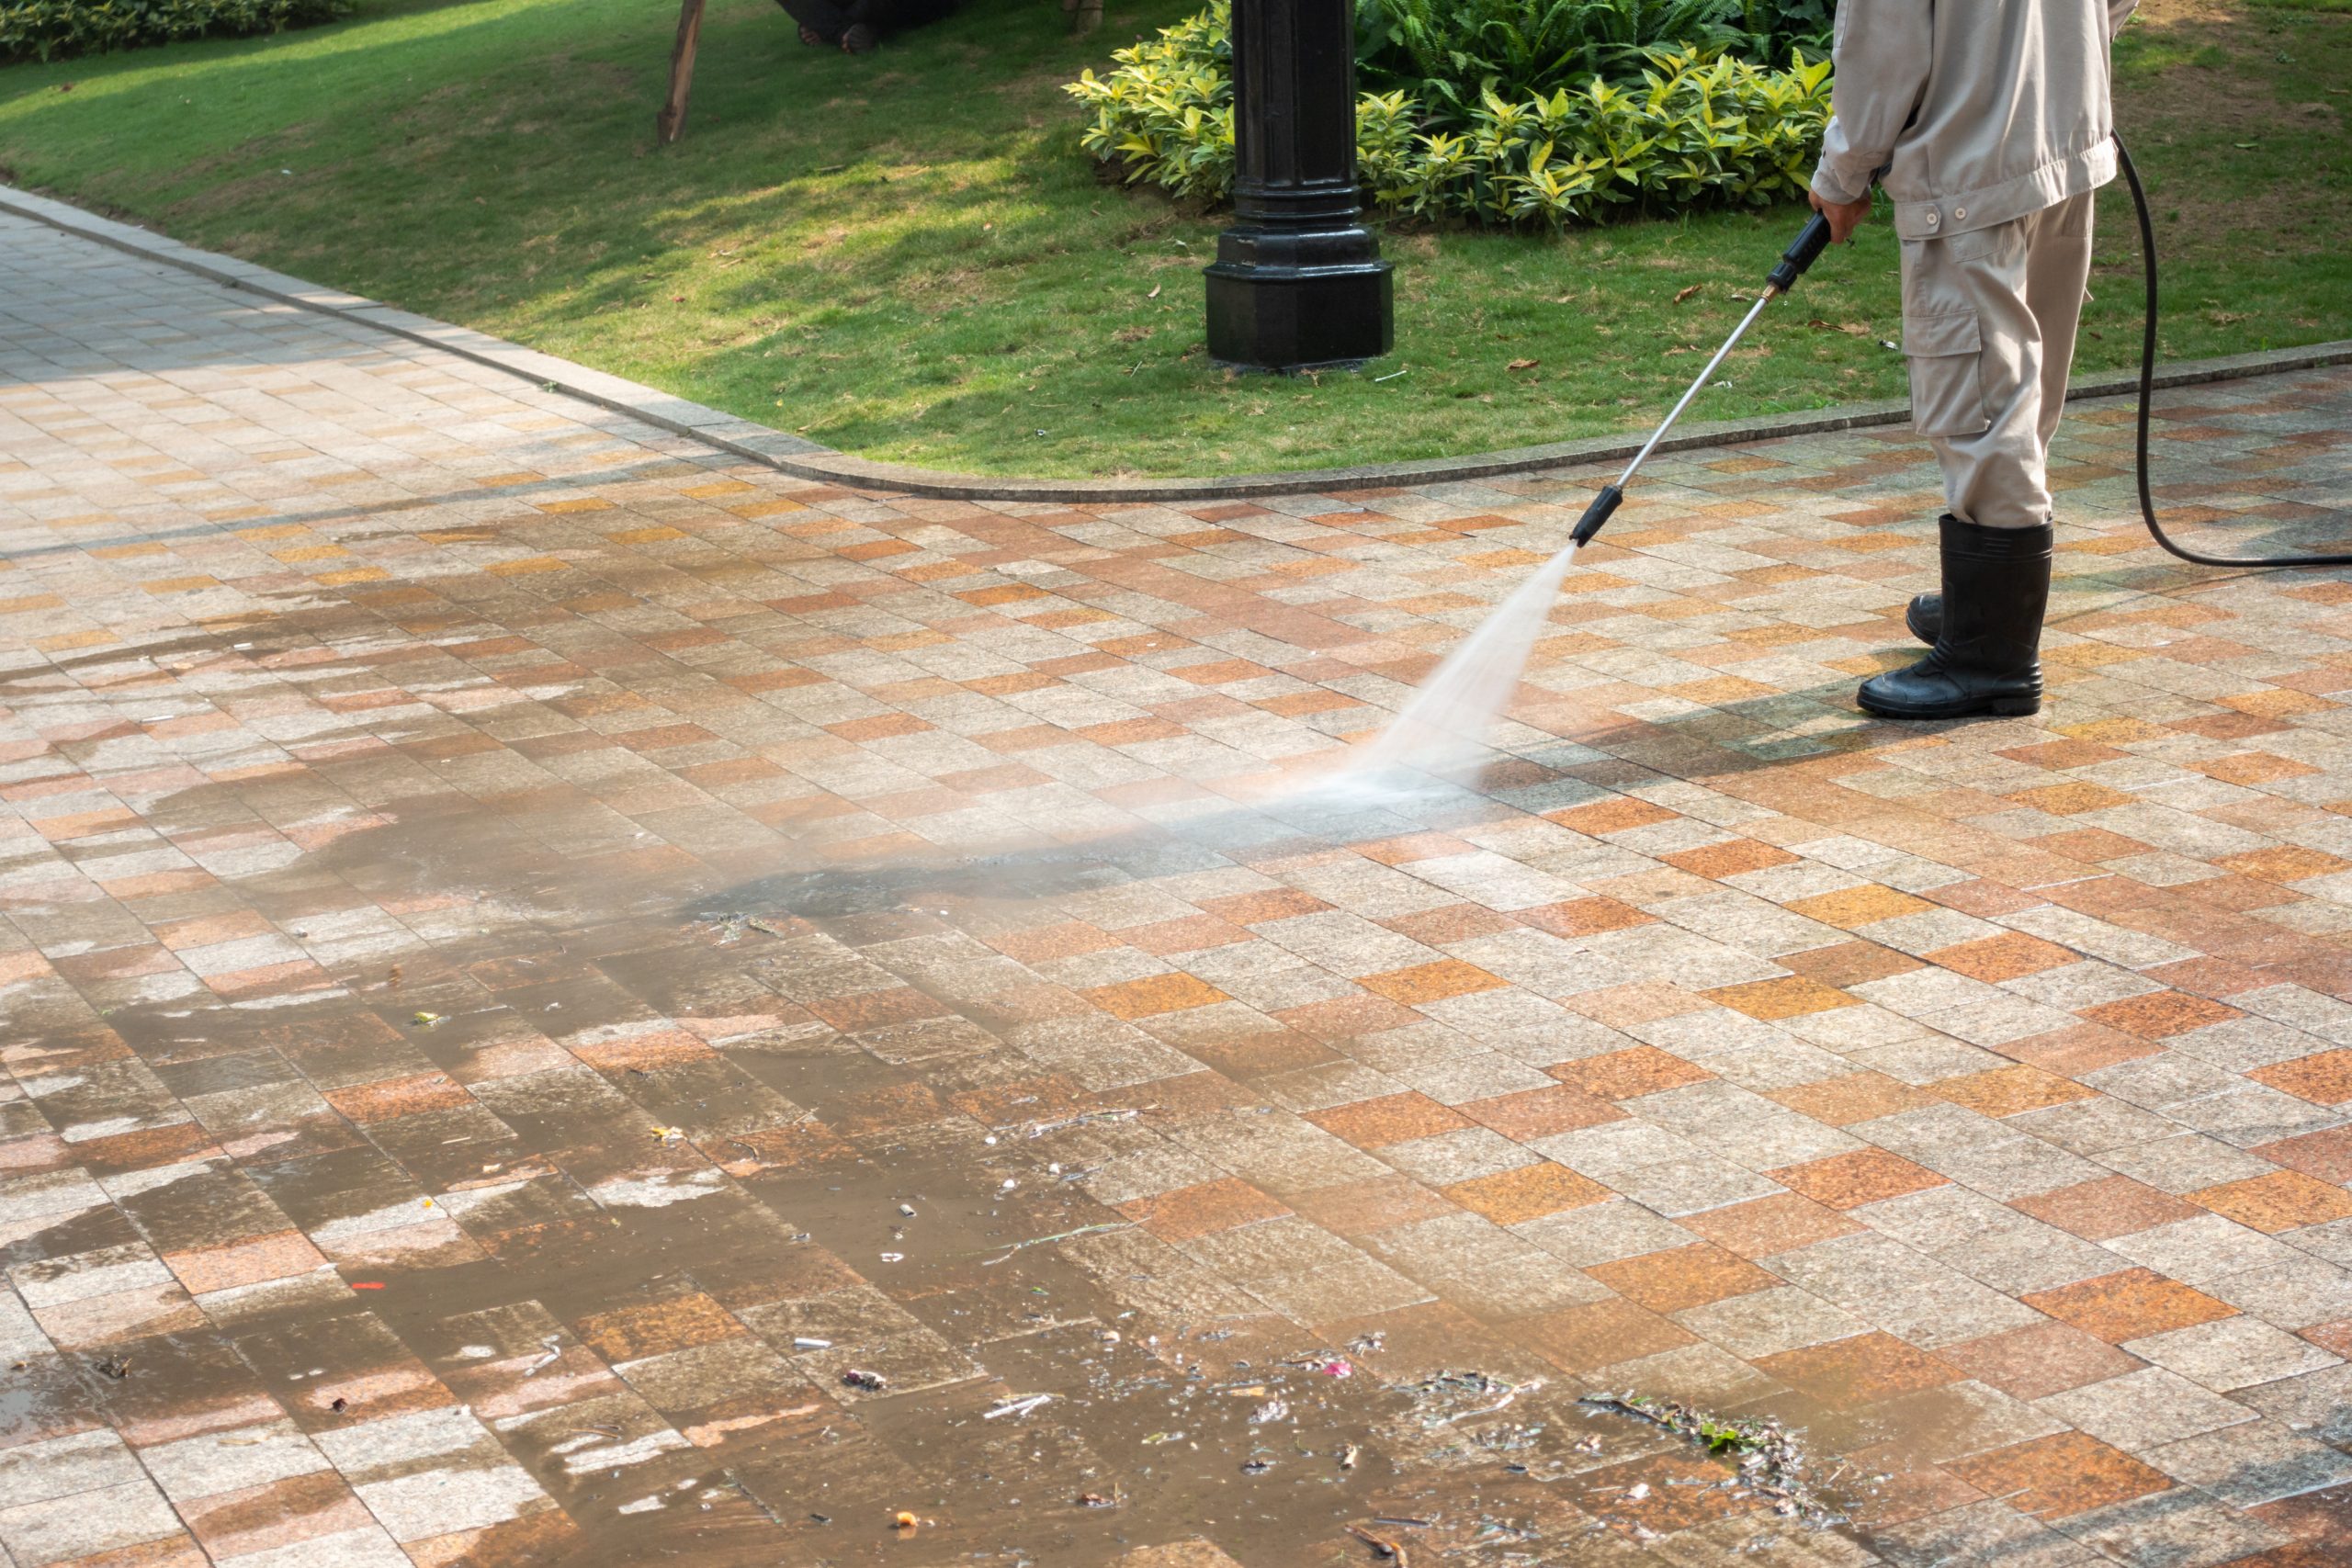 Uses of pressure washer